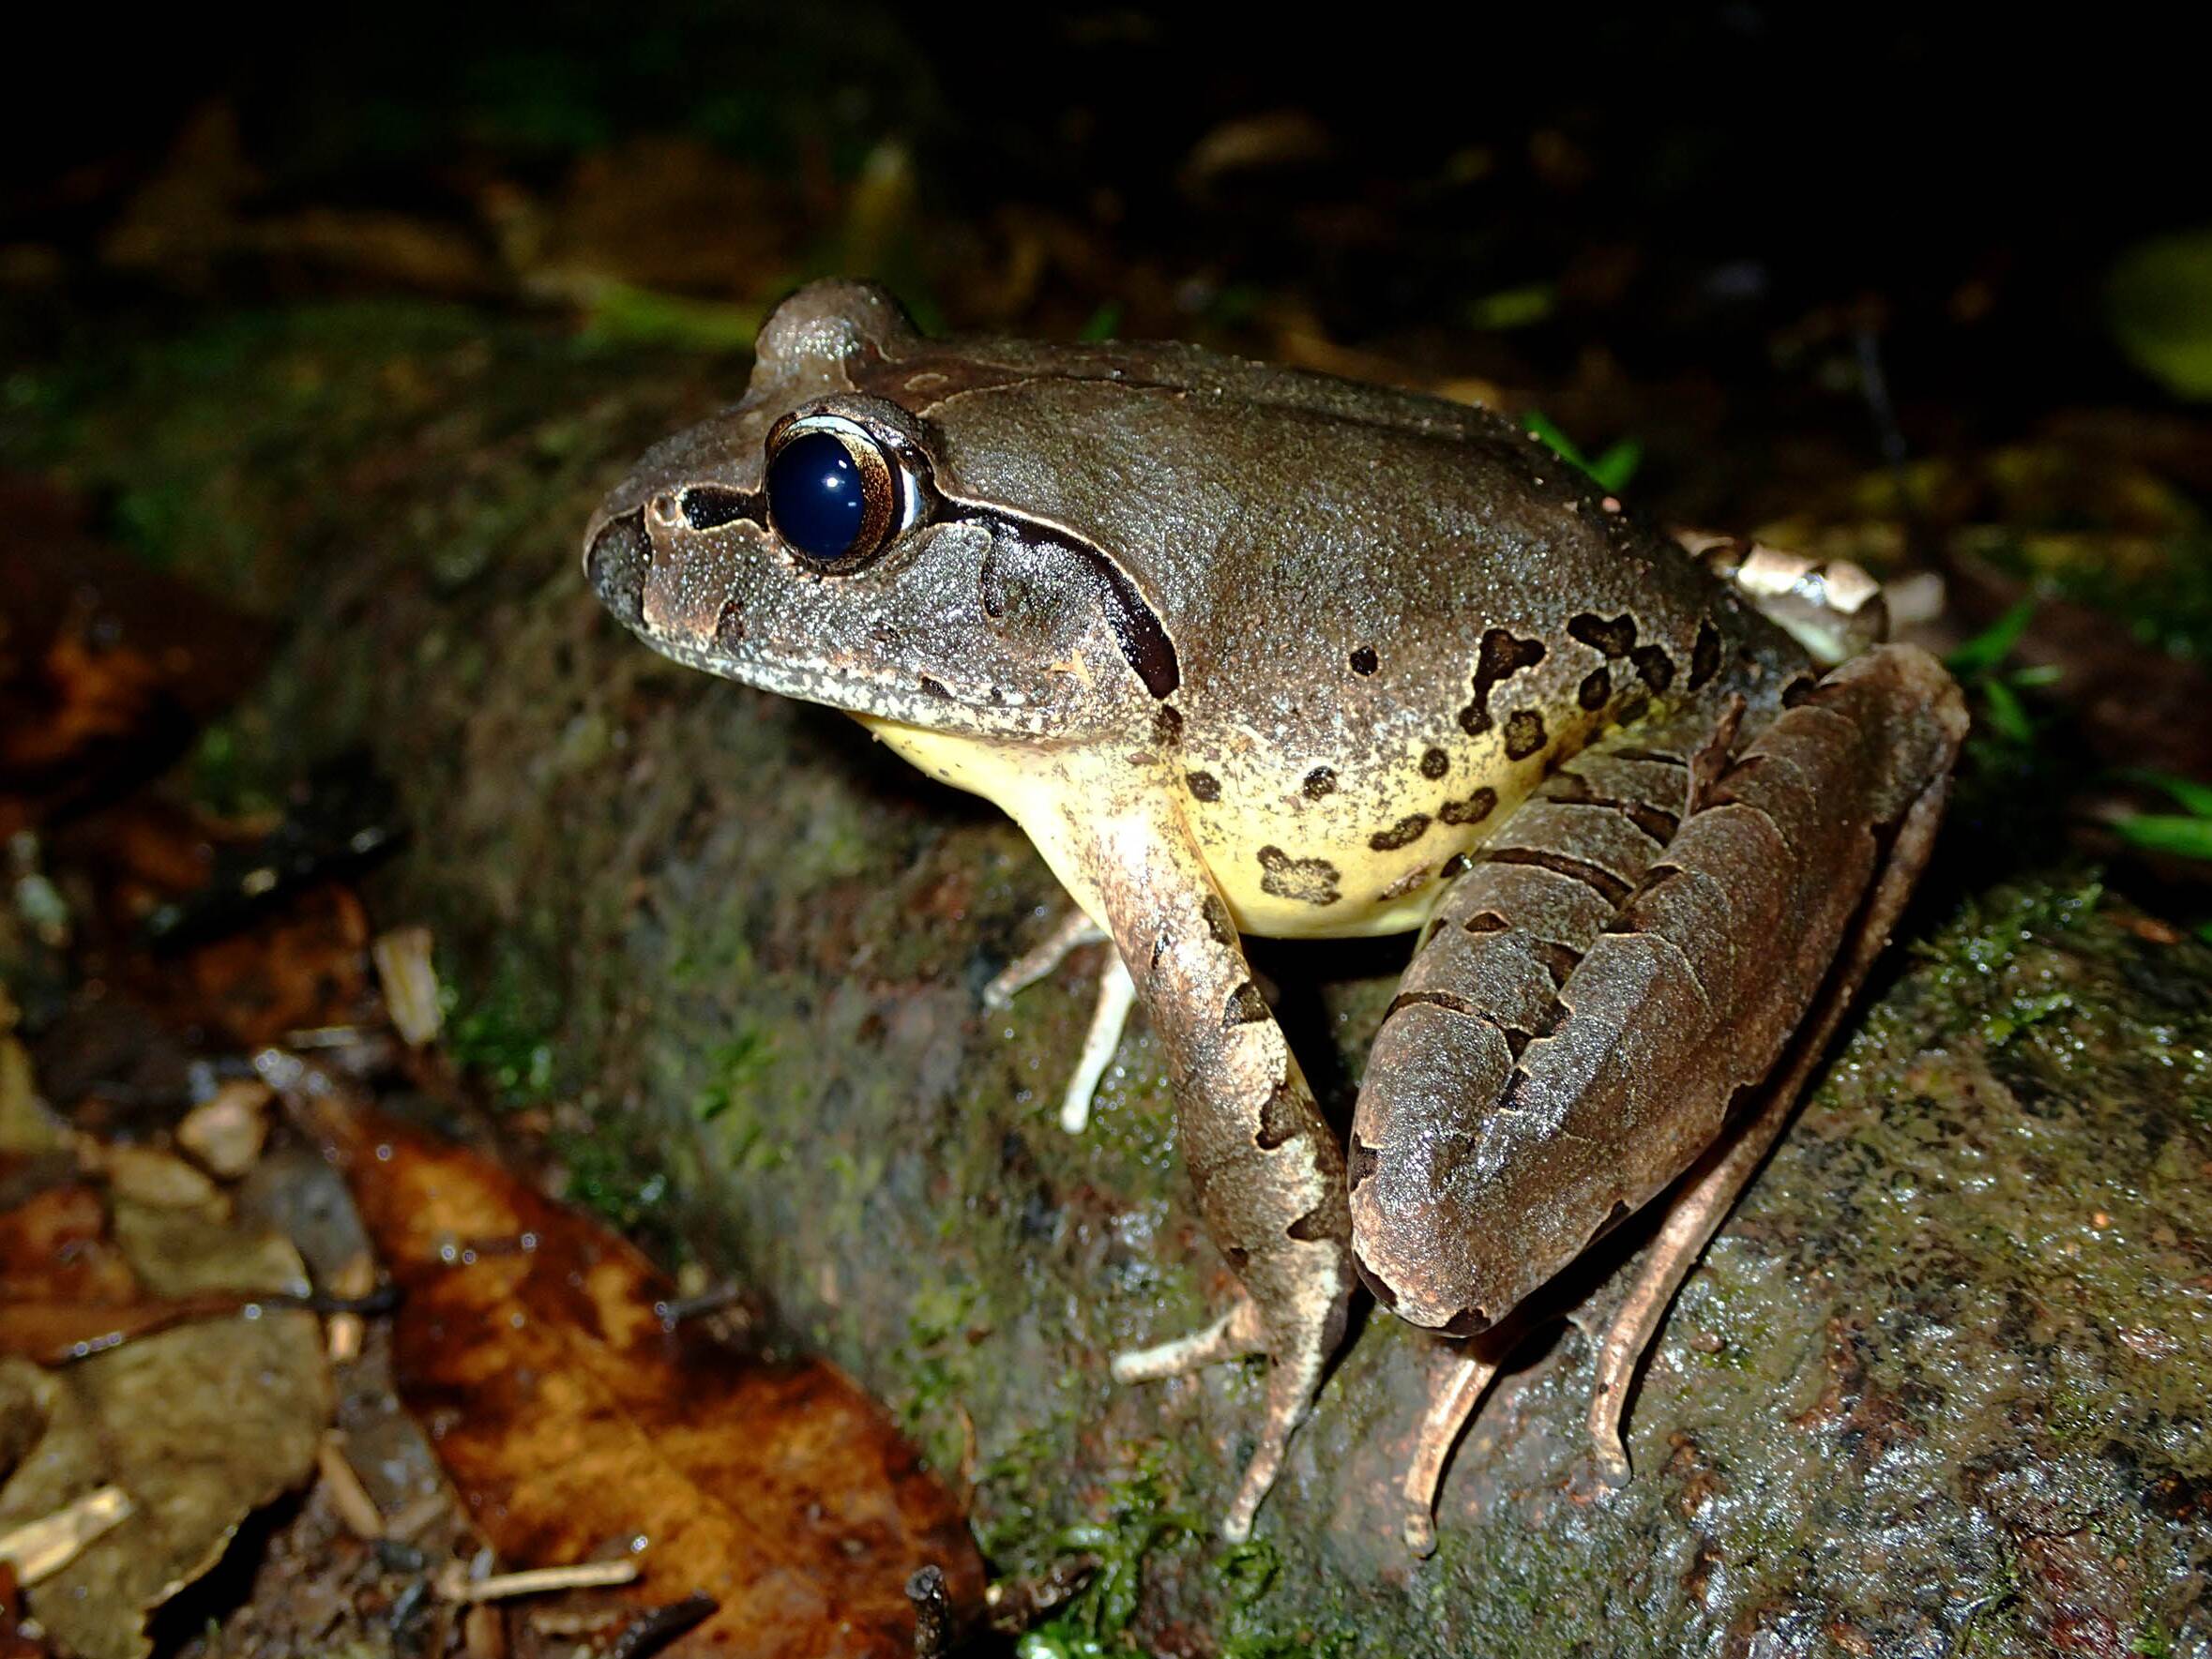 Ribbiting stuff: museum app gives people chance to help in frog research, Amphibians